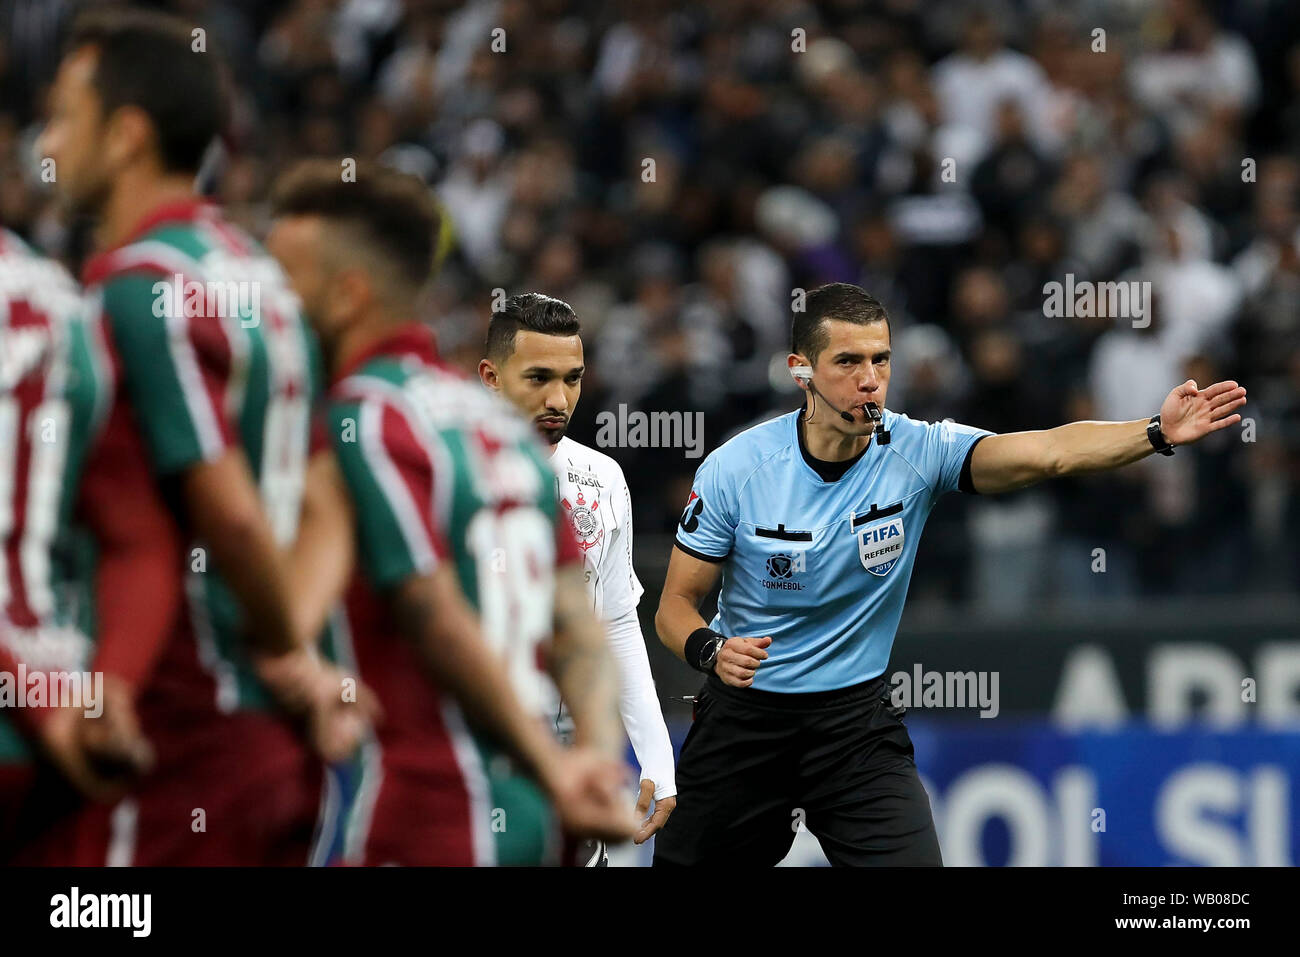 SÃO PAULO, SP - 22.08.2019: CORINTHIANS X FLUMINENSE - Andres Rojas during a match between Corinthians x Fluminense held at Corinthians Arena, East Zone of São Paulo, SP. The match is the first valid for the quarterfinals of the 2019 South American Cup. (Photo: Marco Galvão/Fotoarena) Stock Photo